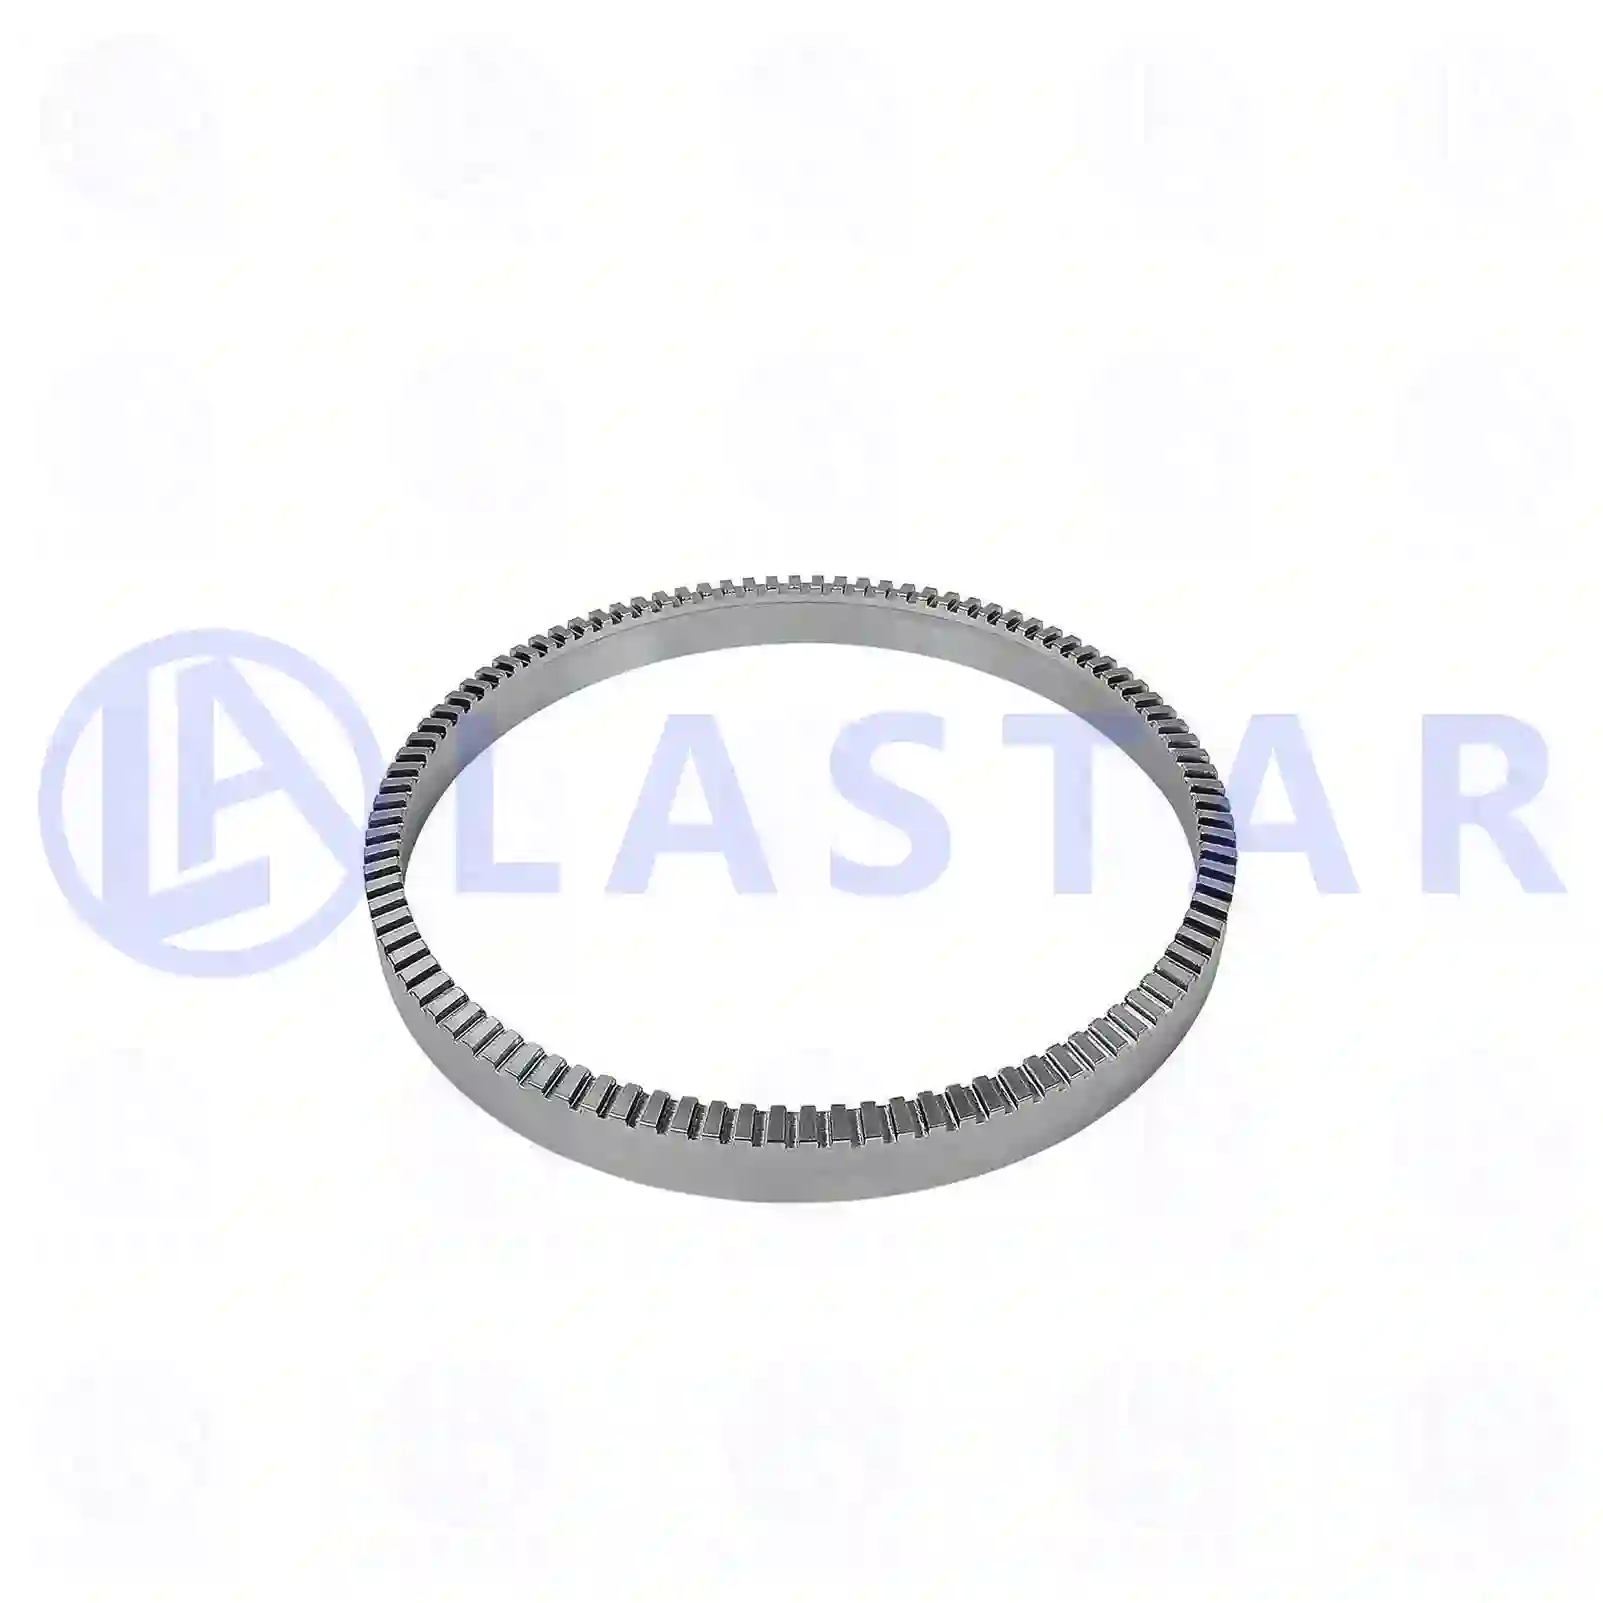 ABS ring, 77726878, 1442296, ZG50003-0008, ||  77726878 Lastar Spare Part | Truck Spare Parts, Auotomotive Spare Parts ABS ring, 77726878, 1442296, ZG50003-0008, ||  77726878 Lastar Spare Part | Truck Spare Parts, Auotomotive Spare Parts